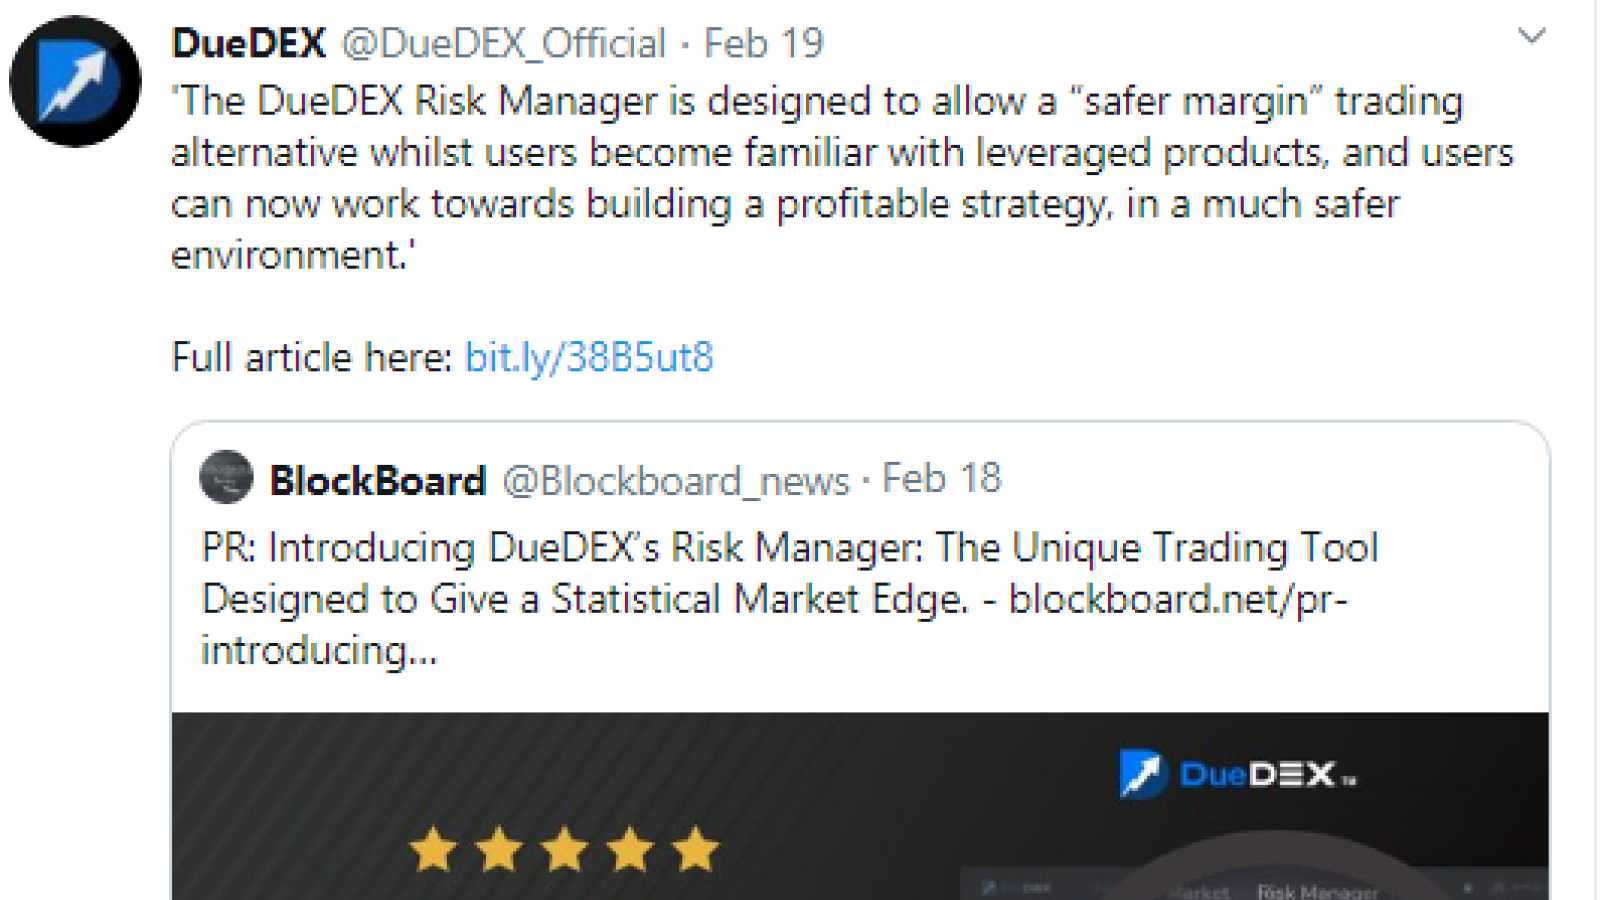 DueDEX trading platform introduces Risk Manager toolkit